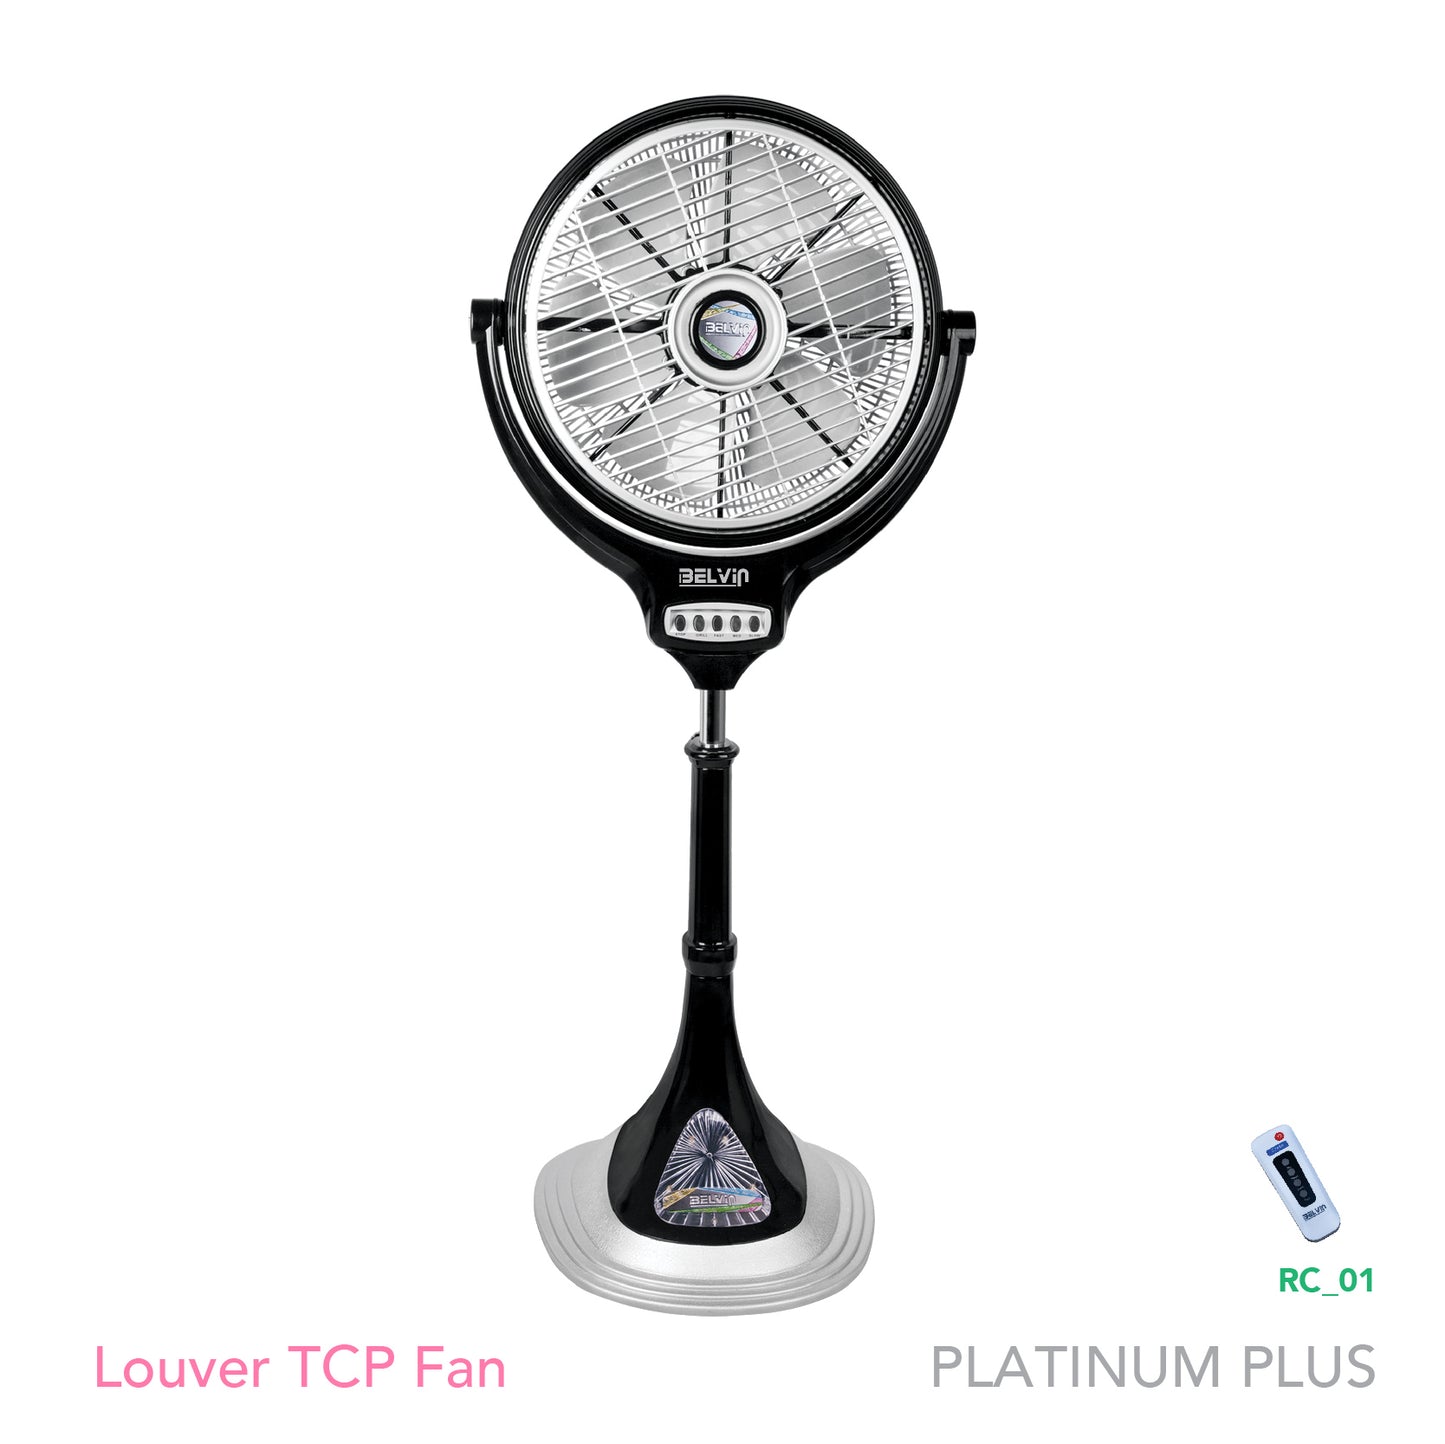 Belvin Louver Tcp 14' Fans Platinum Plus Series 3 Speed Operation Through Switch Brand Warranty